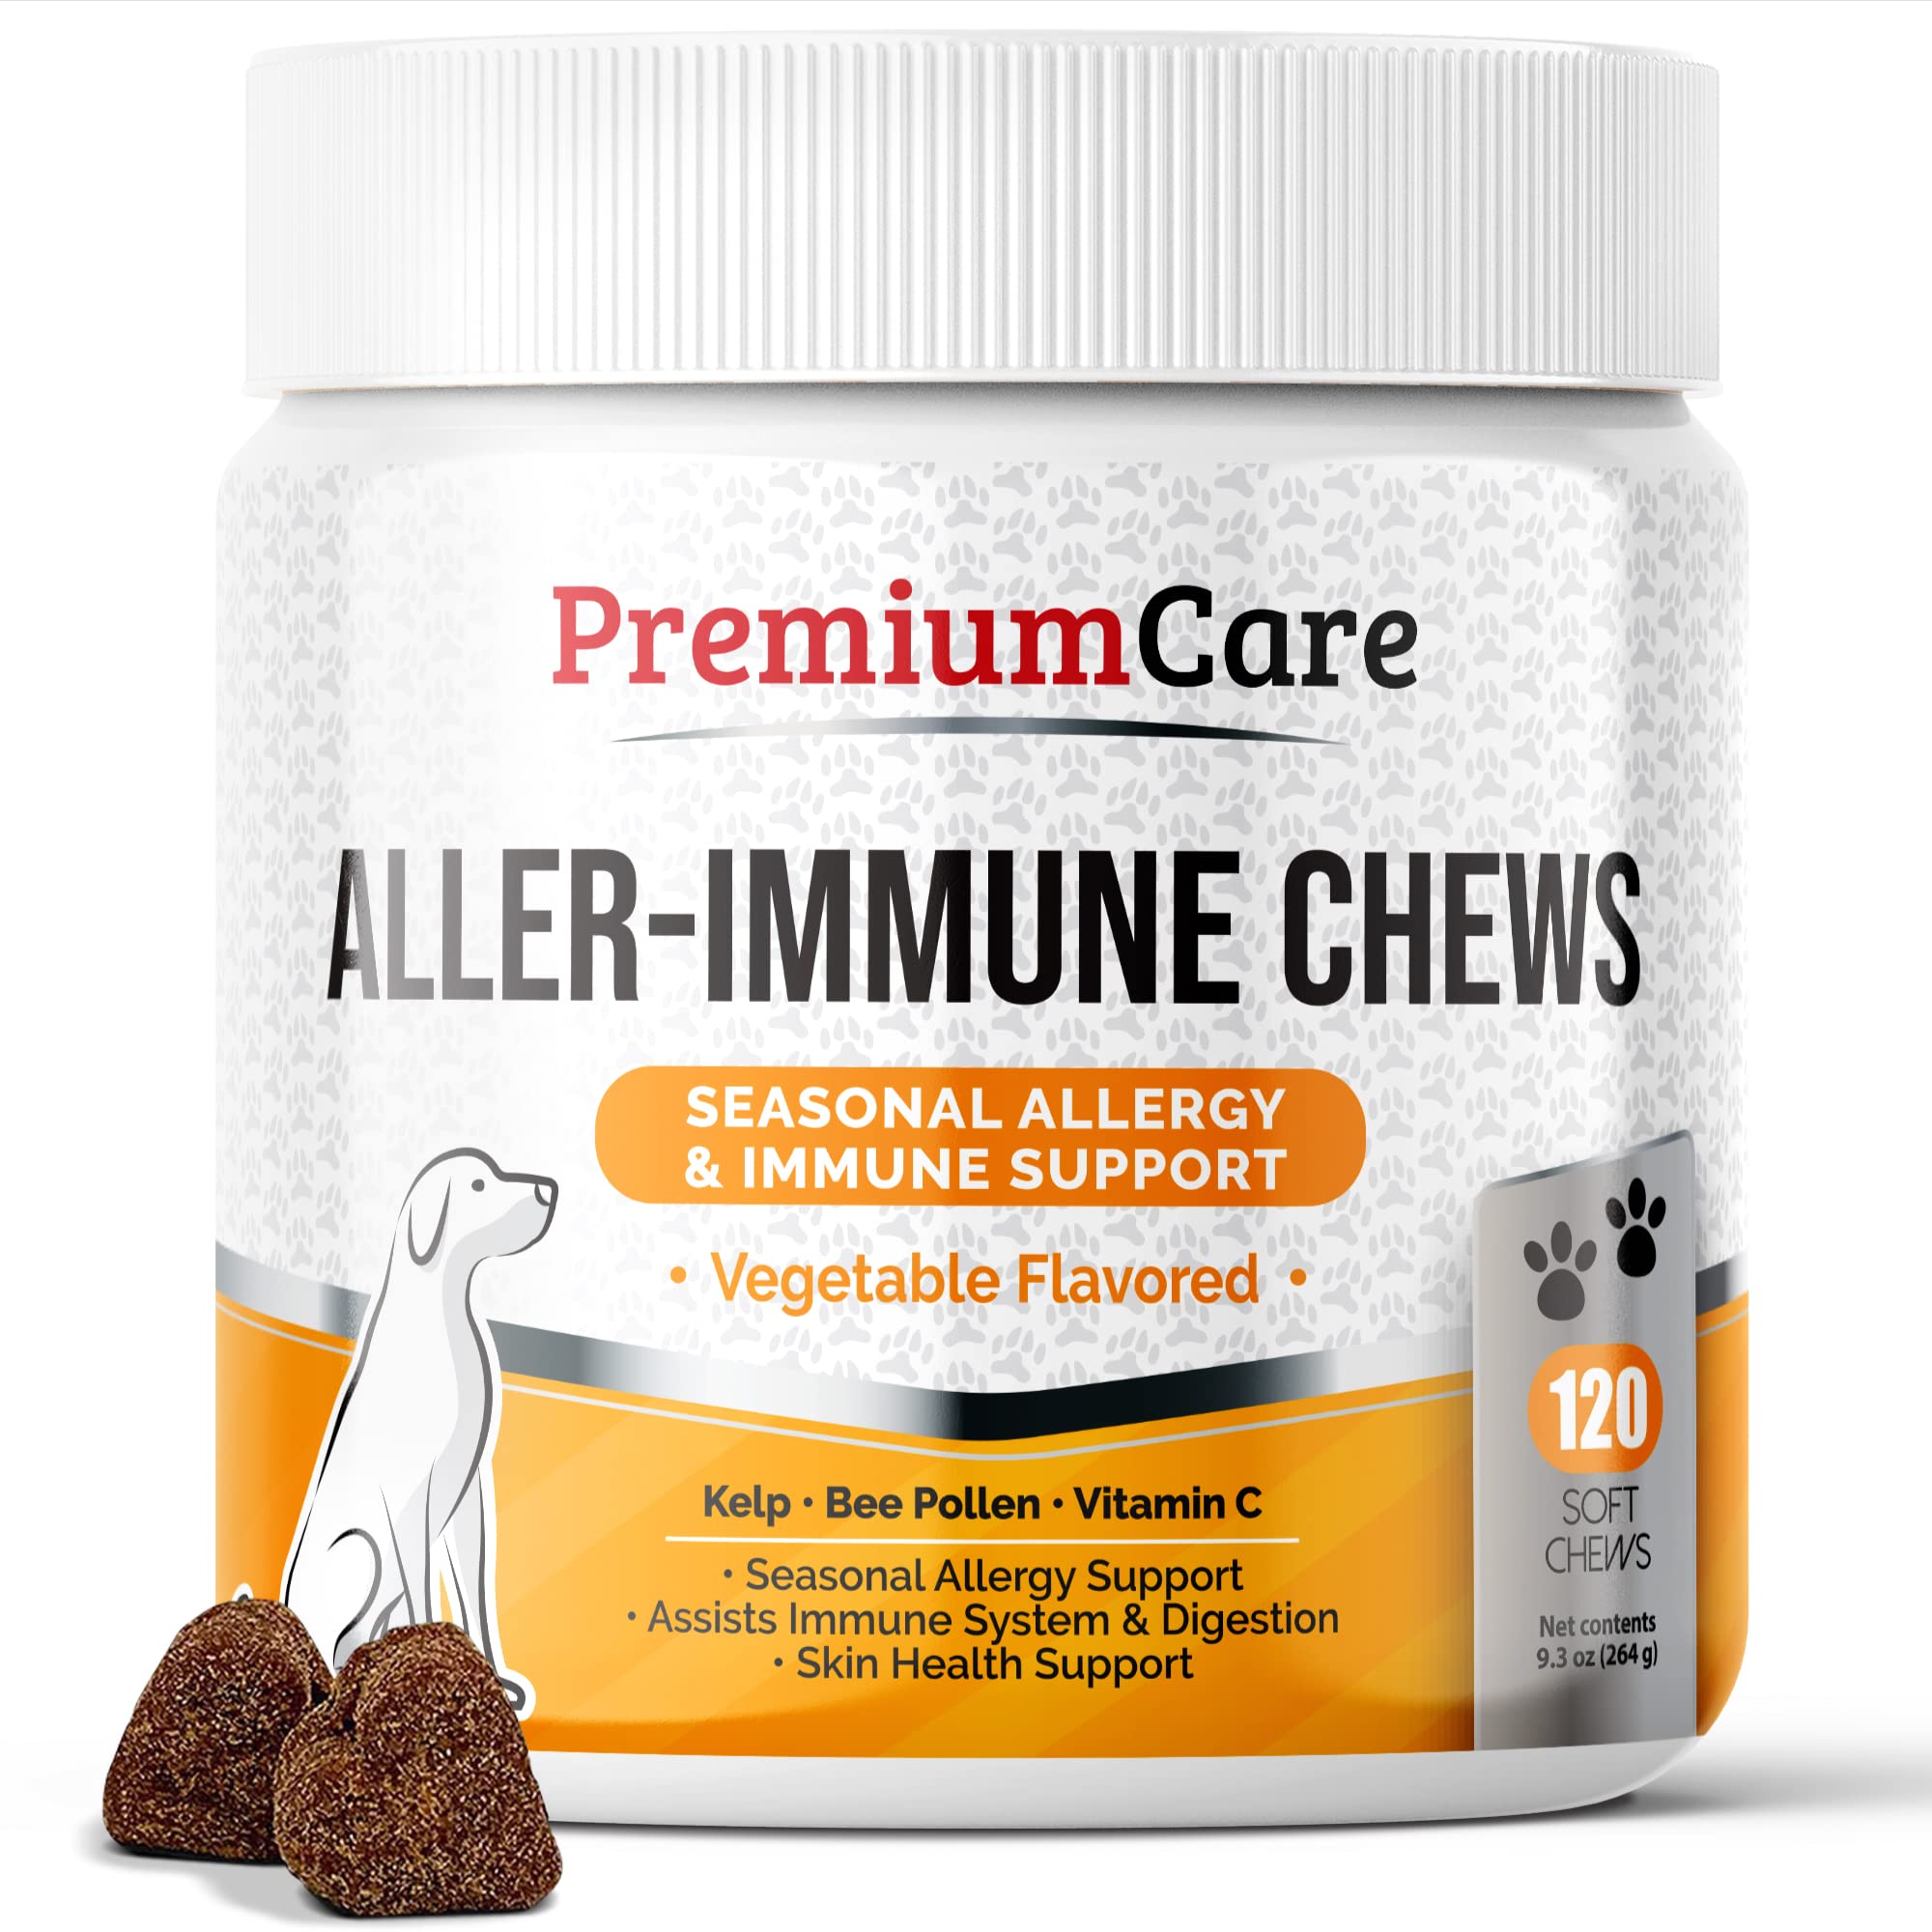 Book Cover Premium Care Dog Allergy Chews & Immune Supplement - Environmental and Seasonal Support for Pets - Skin Health Support with Colostrum, Vitamin C and Bee Pollen - 120 Allergy Chews for Dogs